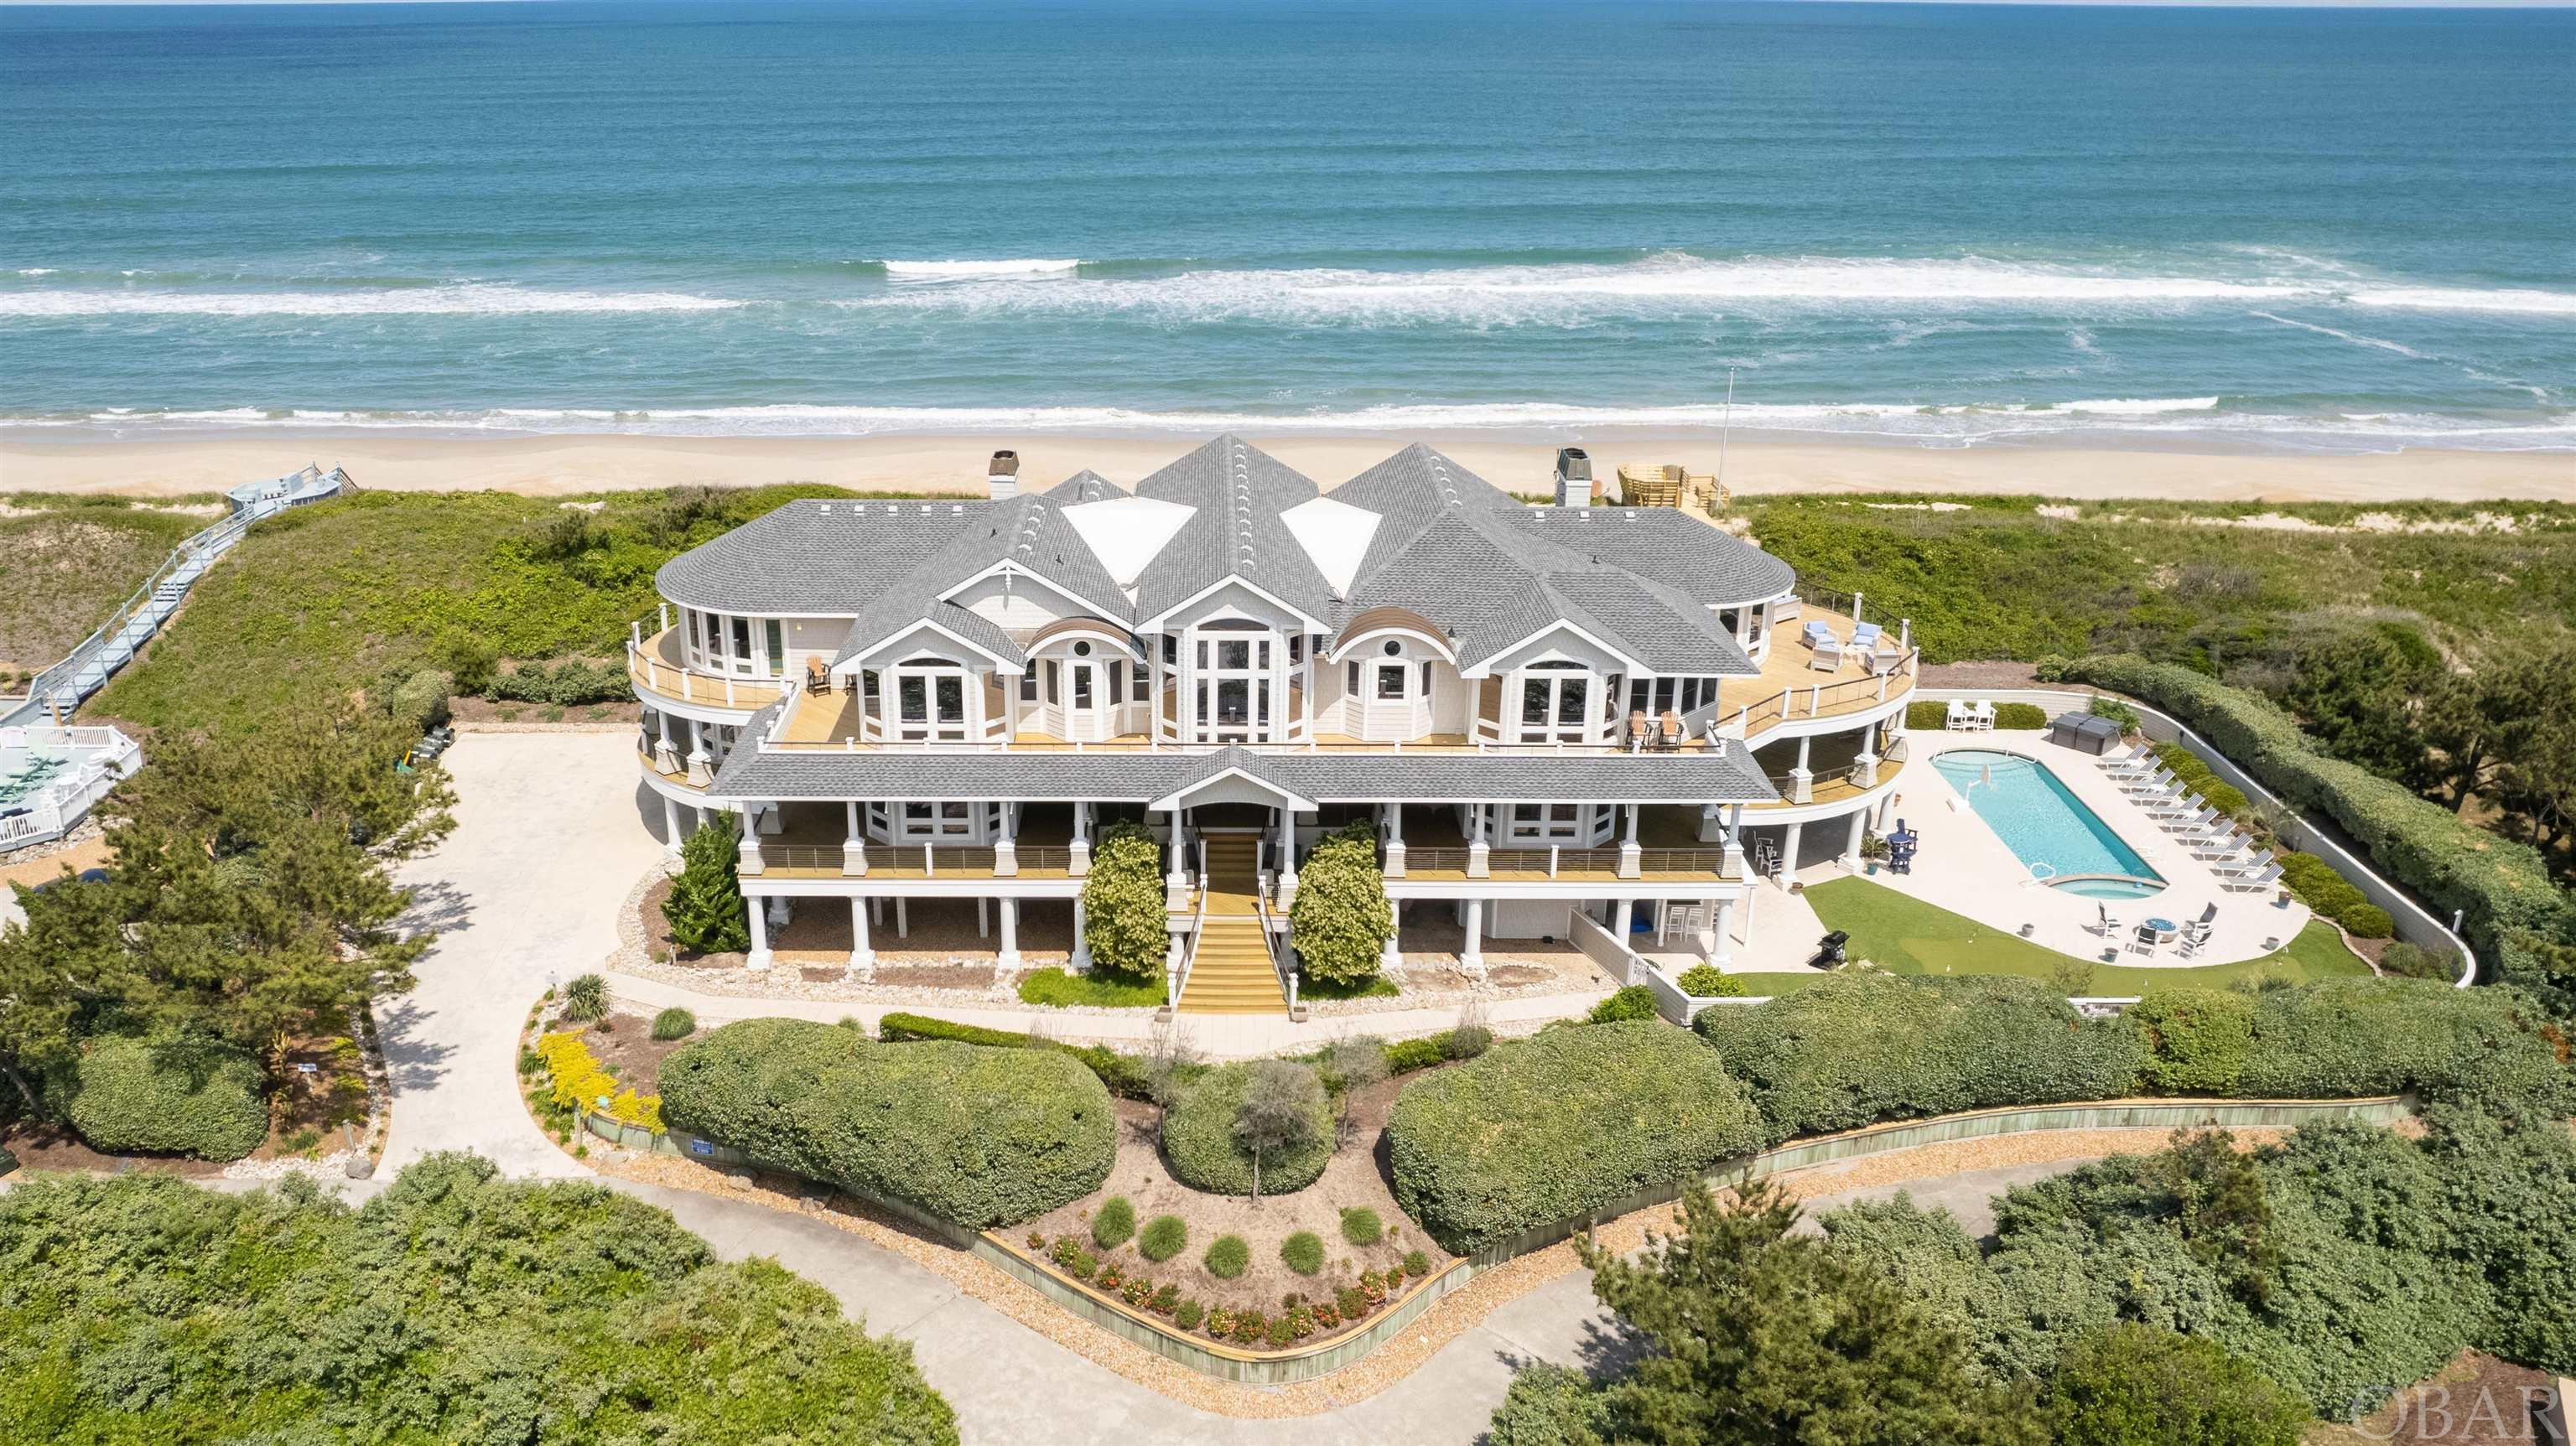 A WELCOME RESPITE - The OUTER BANKS PREMIER LUXURY OCEANFRONT ESTATE! In the picturesque northern Outer Banks where the Atlantic Ocean and Currituck Sound nearly unite, there is a stunning stretch of beach unlike any other, featuring a remarkable beachfront home unlike any other. With panoramic 360 degree water views, unobstructed sunrise and sunset vistas and 250 feet of secluded beach, this is your incomparable coastal retreat in the prestigious, highly desirable community of Pine Island. Nestled in Corolla close to the village of Duck but seemingly in a world all its own, the home’s nine bedrooms coupled with generous indoor and outdoor amenities, can be your luxurious private residence or a highly distinctive, coveted rental property. Each of the nine oversized bedrooms comes with an ensuite bathroom and spacious closets to accommodate plenty of family and friends. The bedrooms are spread across three floors -two on the first, five on the second and two on the third.  Inside and outside the 11,000 square foot home, a number of recent improvements and upgrades were made including newly refinished hardwood floors; new hardwood floors in the second floor hallway; new carpet in the theater room and in second floor bedrooms; new quartz countertops in the kitchen and wet bar; a new above ground hot tub; new third floor decking; new dune walk and deck; and much more. The remarkable living area is an open-concept floor plan with an expansive great room featuring huge windows overlooking the ocean plus a sizable dining room overlooking the Sound, and a thoughtfully designed gourmet kitchen with dual ovens, two dishwashers and three full-sized refrigerators. More benefits of the living space include: a home theater room that seats more than 10;two gas fireplaces;large,private office, a sauna with room for six; a rec room with a pool table, foosball table and table shuffleboard; a sun room; an elevator to easily move between floors; and a spacious one-car garage. Here in this self-contained oasis enjoy the invigorating, mild Outer Banks coastal weather on the modern cable-railed decks that wrap around the home for 360 degrees of unobstructed views. Just below the decks sits a pristine salt water pool and poolside wet bar complete with a refrigerator, sink and television. Also outdoors is a private five-hole putting green. For days when the sand and waves come calling, a private walkway provides special, direct access to a rarity on the Carolina coast - 250 feet of coastline. During cool nights, lounge around a luxury outdoor fire pit or enjoy a relaxing evening on the screened in porch. Every inch of the home is surrounded with professional, spectacular landscaping that effortlessly combines with the natural surroundings. Just outside the home is a semi-private street with just 2 other homes. Pine Island homeowners can enjoy the convenience of the private Pine Island airstrip. On the beach you may be lucky enough to encounter a sea turtle nest boil as the young turtles hatch and make their way to their ocean journey. On those days when you want to explore your neck of the woods, walk just across the street to a natural hidden treasure - the Pine Island Audubon Preserve. Here you can meander along a spectacular 2.5 mile nature trail filled with evergreen maritime forests of Loblolly Pine and twisted Live Oaks, stunted Oak forests and the rare Red Bay Shrub Swamp. Beside the shallow brackish water of the Currituck Sound, you’ll also enjoy a world filled with various wildlife and waterfowl. Nine miles to the north is the quaint village of Corolla with shops, restaurants, the historic Currituck Beach Lighthouse, the Whalehead Club, and the unique wild horse population. Just seven miles to the home’s south lies the award-winning Town of Duck. Exclusive, rare and spectacular, A Welcome Respite is the perfect retreat for those seeking privacy and adventure surrounded by unmatched natural beauty in the heart of North Carolina's Outer Banks.